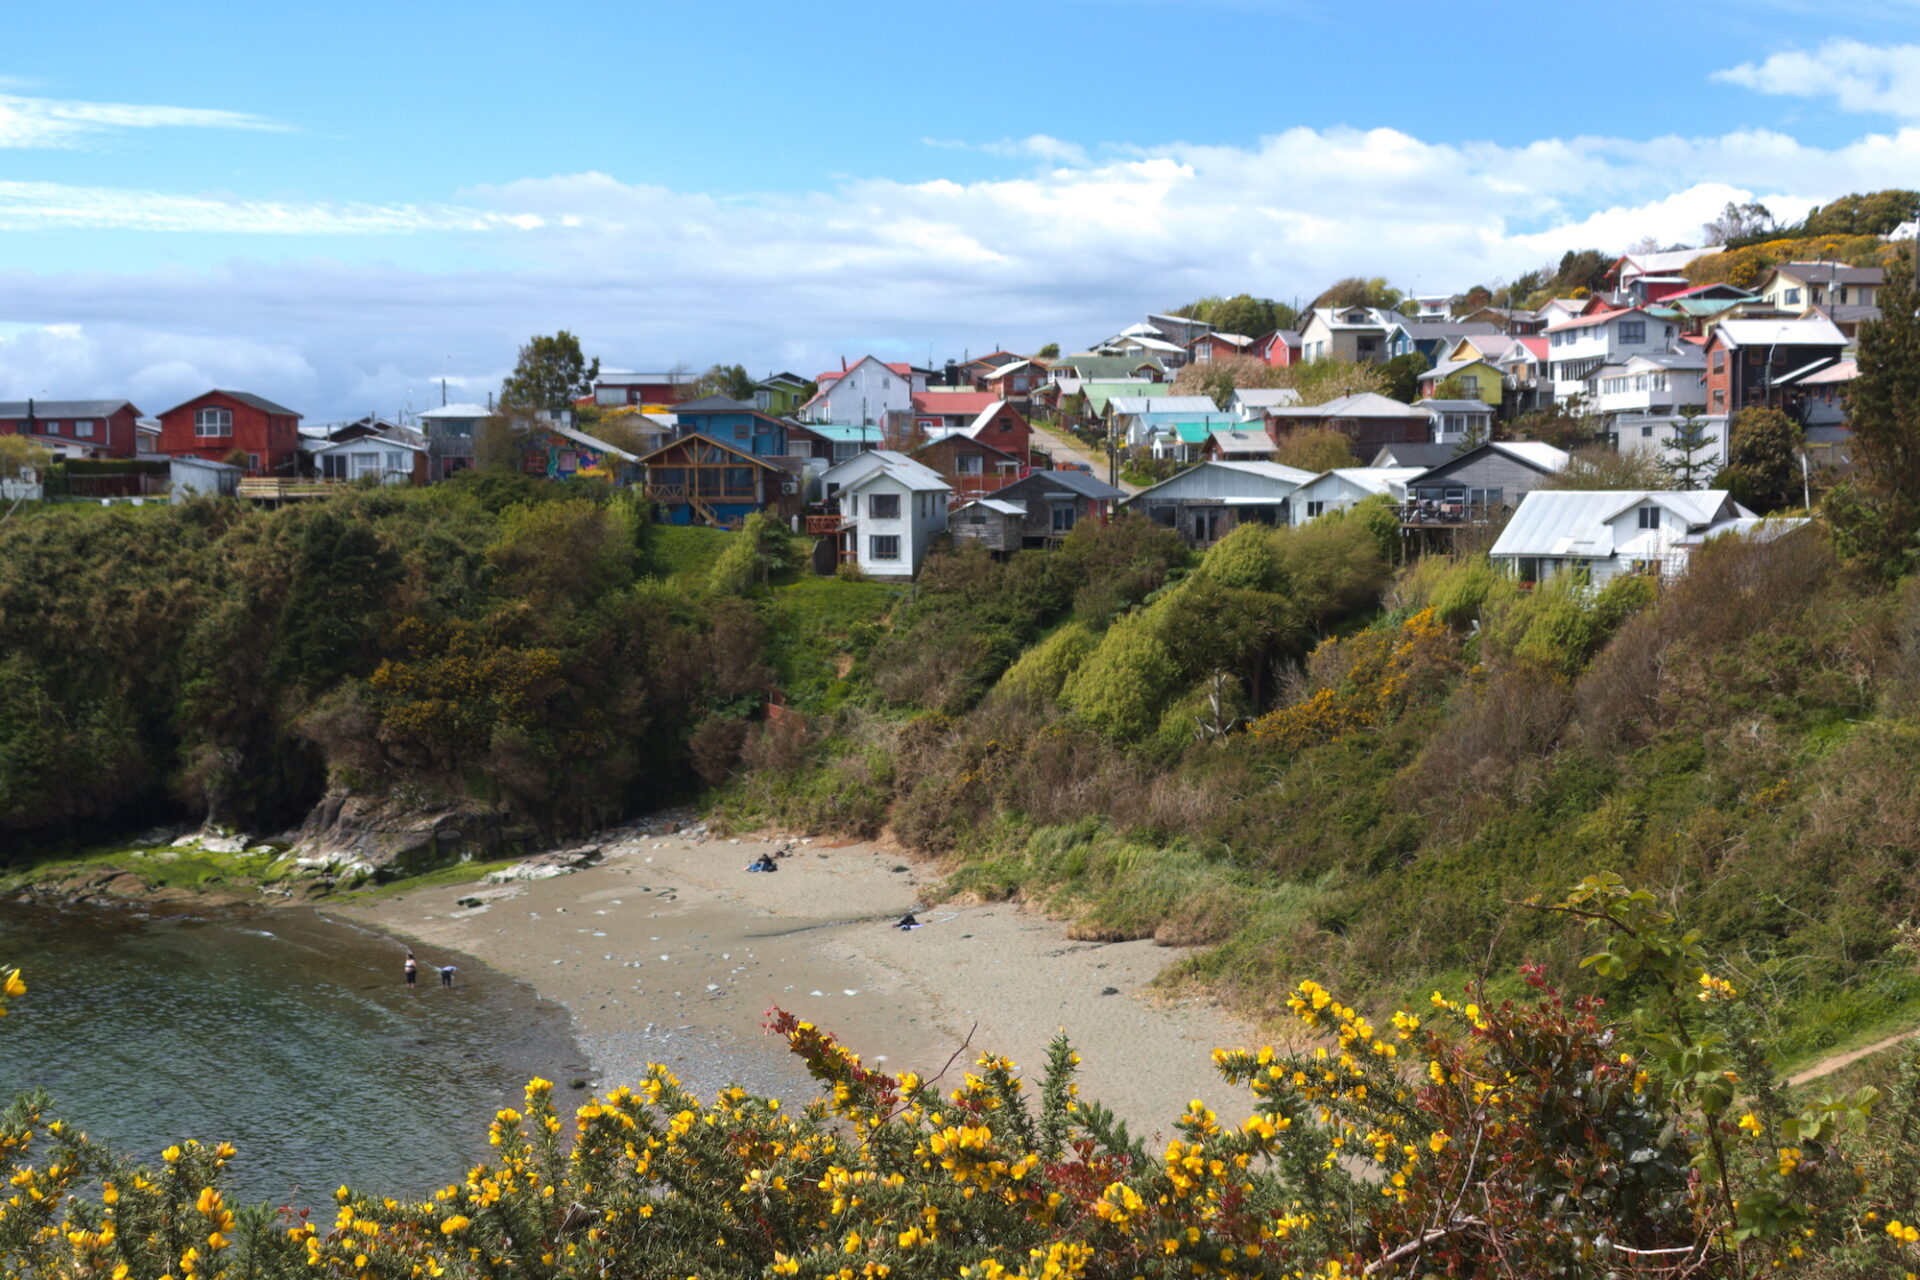 What to Expect on a Day Trip to Chiloé Island from Puerto Varas